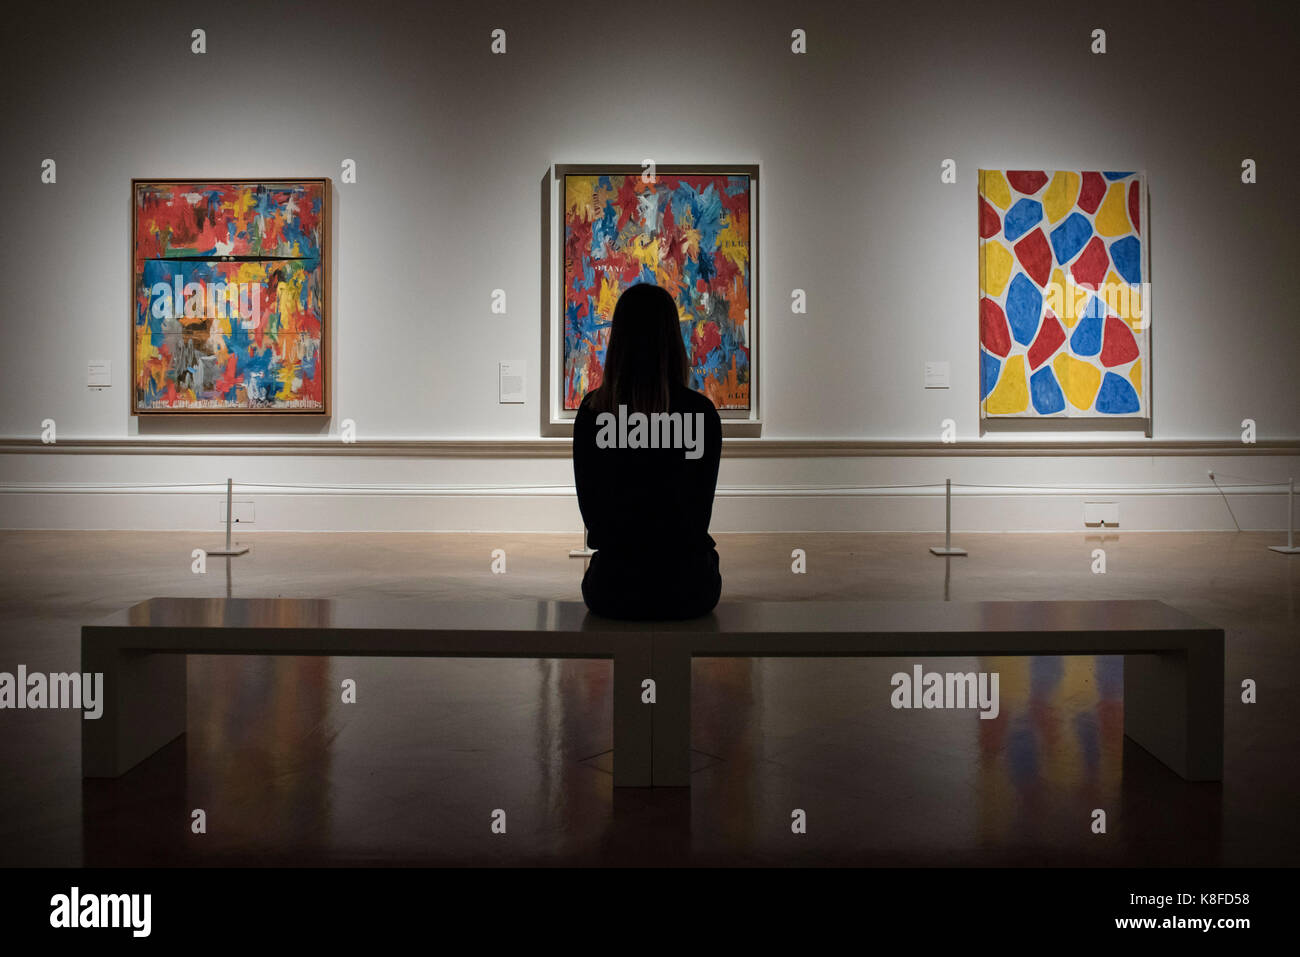 London, UK.  19 September 2017.  A visitor views (L to R) "Painting With Two Balls", 1960, "False Start", 1959, and "Nines", 2006, all by Jasper Johns.  Preview of a landmark exhibition by Jasper Johns RA called "Something Resembling Truth" at the Royal Academy of Arts in Piccadilly.  Sculptures, drawing, prints plus new works are on display 25 September to 10 December 2017.  Credit: Stephen Chung / Alamy Live News Stock Photo